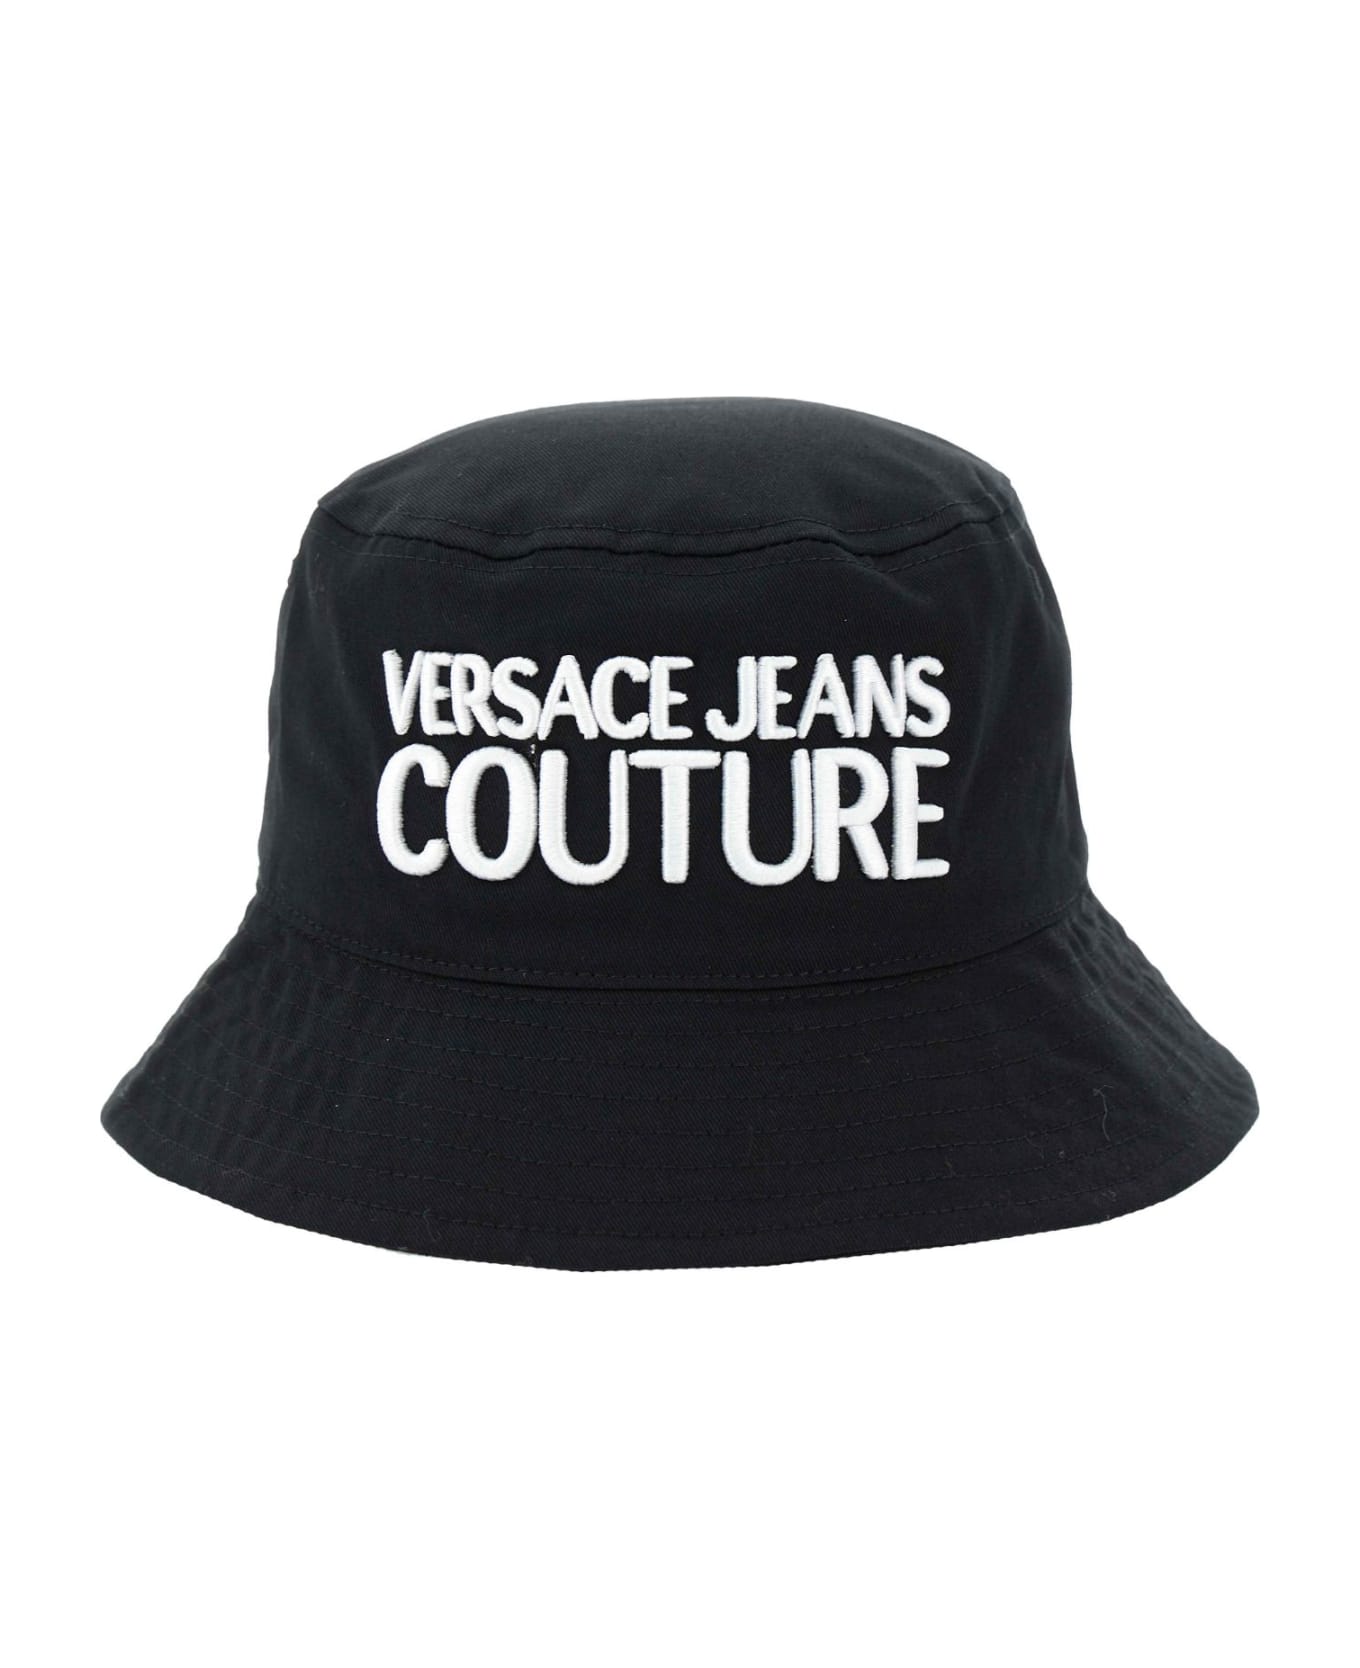 Versace Jeans Couture Hat - BLACK/WHITE 帽子